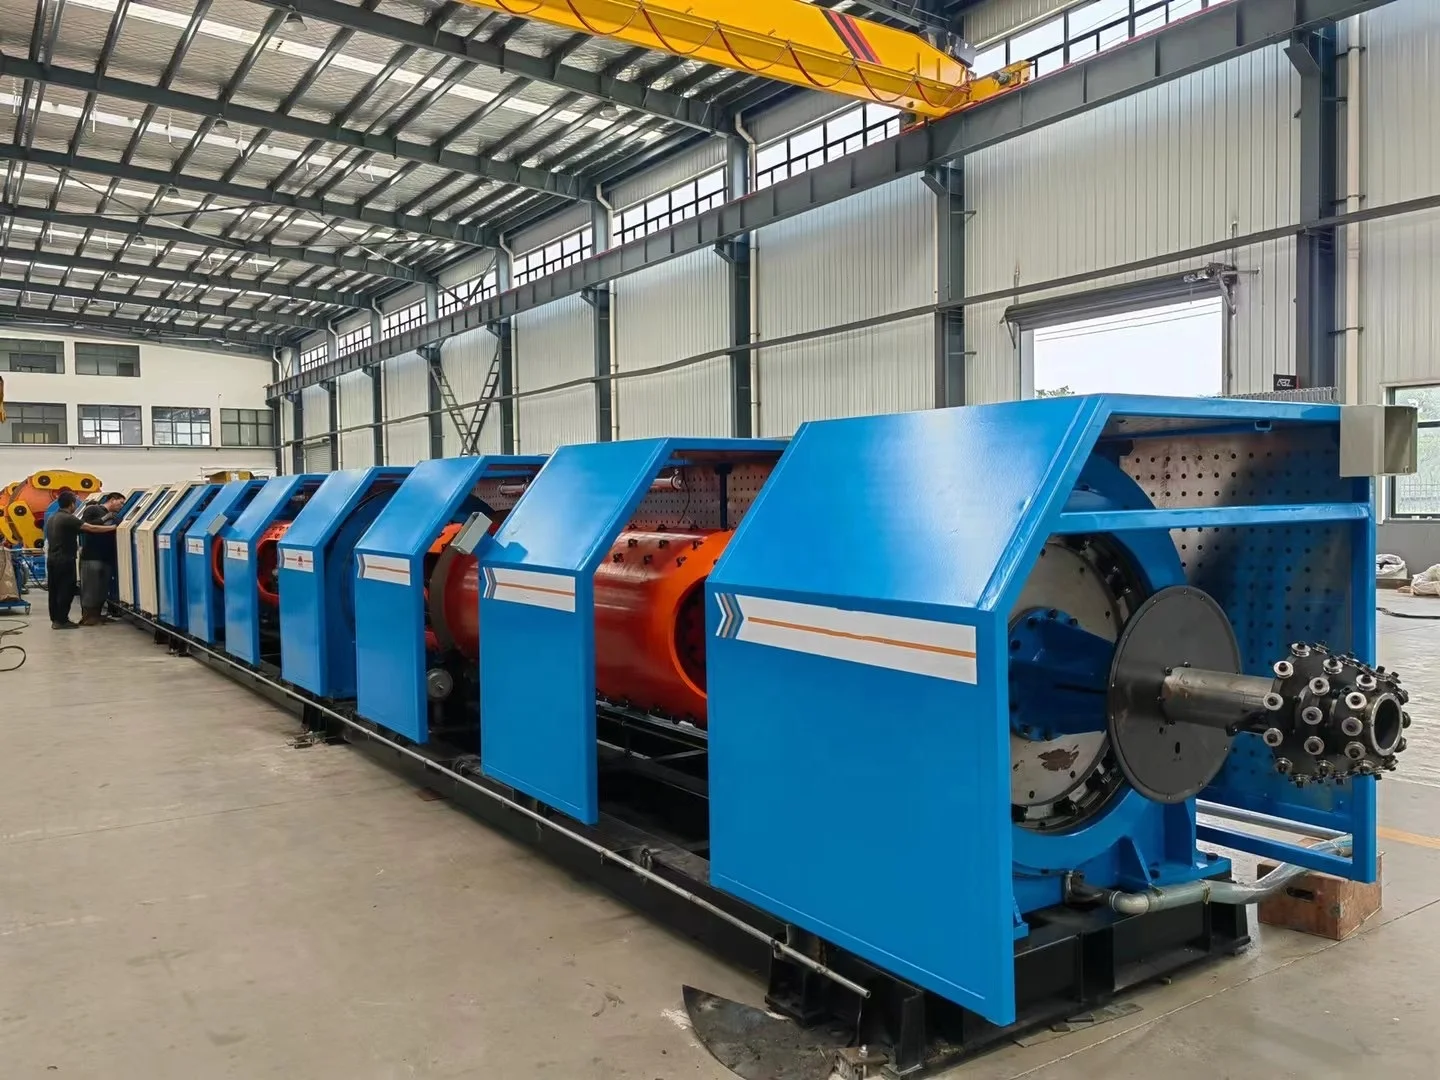 Giant 630/12 electric wire cable tubular stranding machine for stranding copper wire and aluminum wire